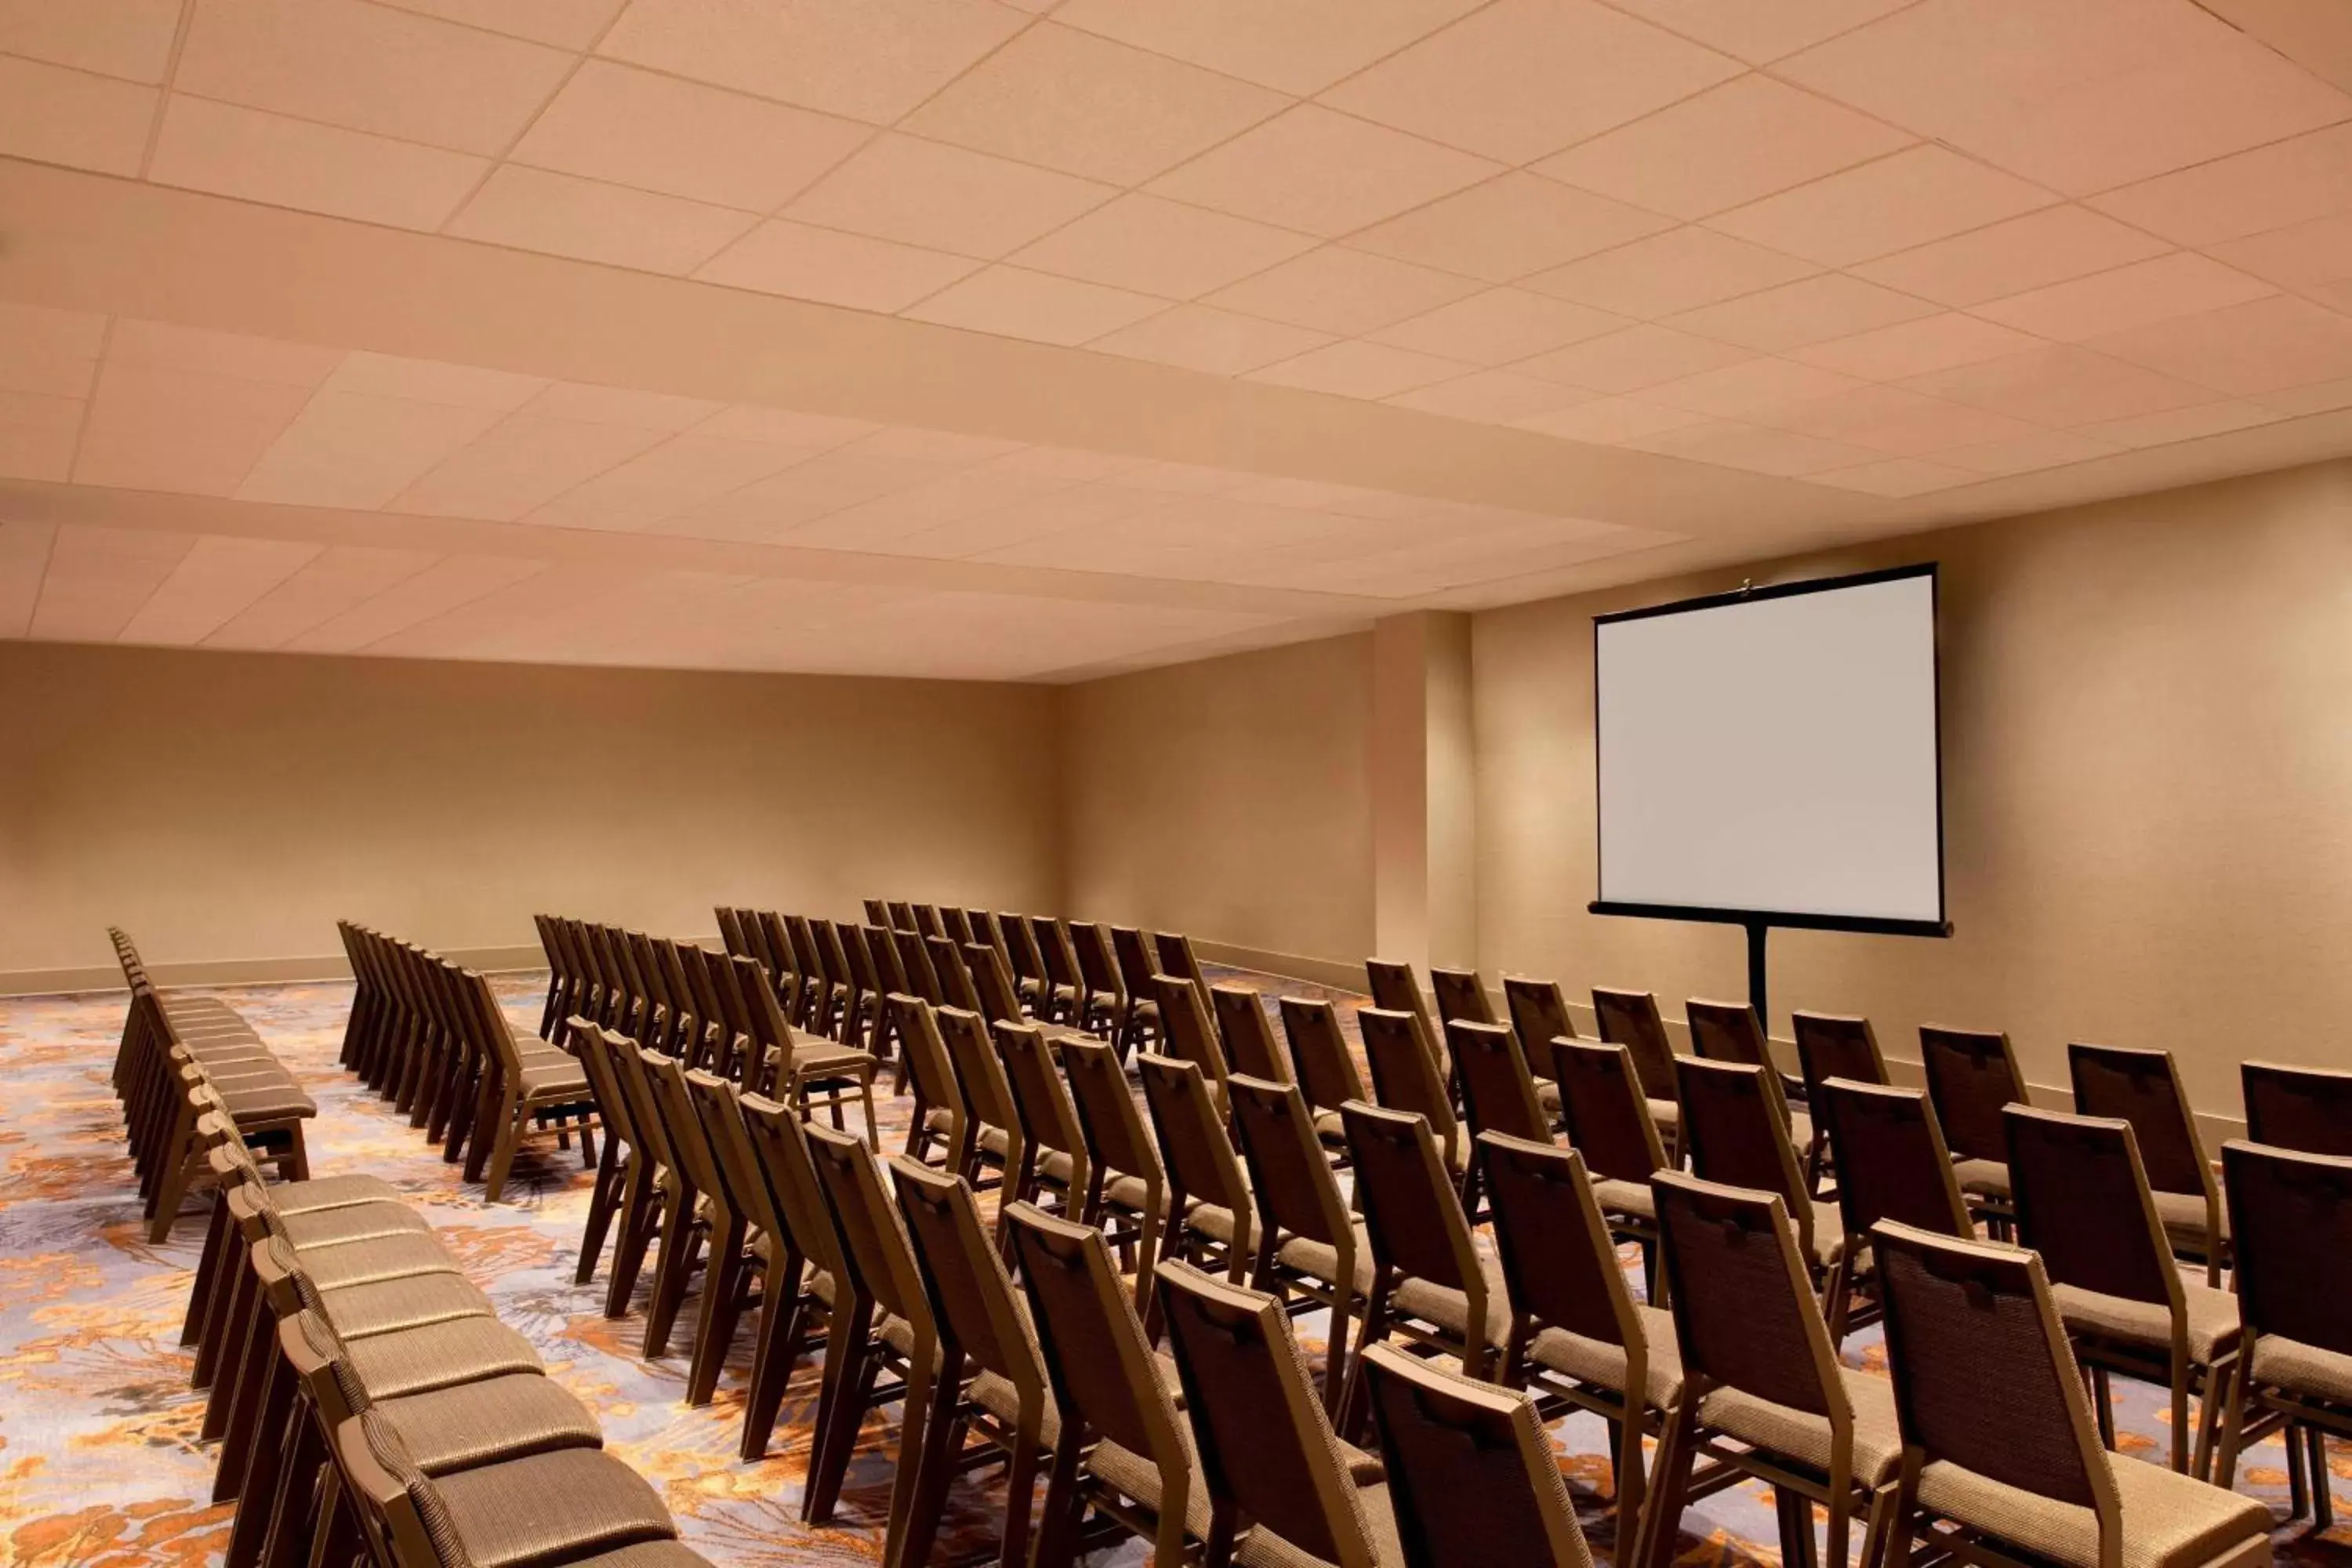 Meeting/conference room in The Westin Peachtree Plaza, Atlanta